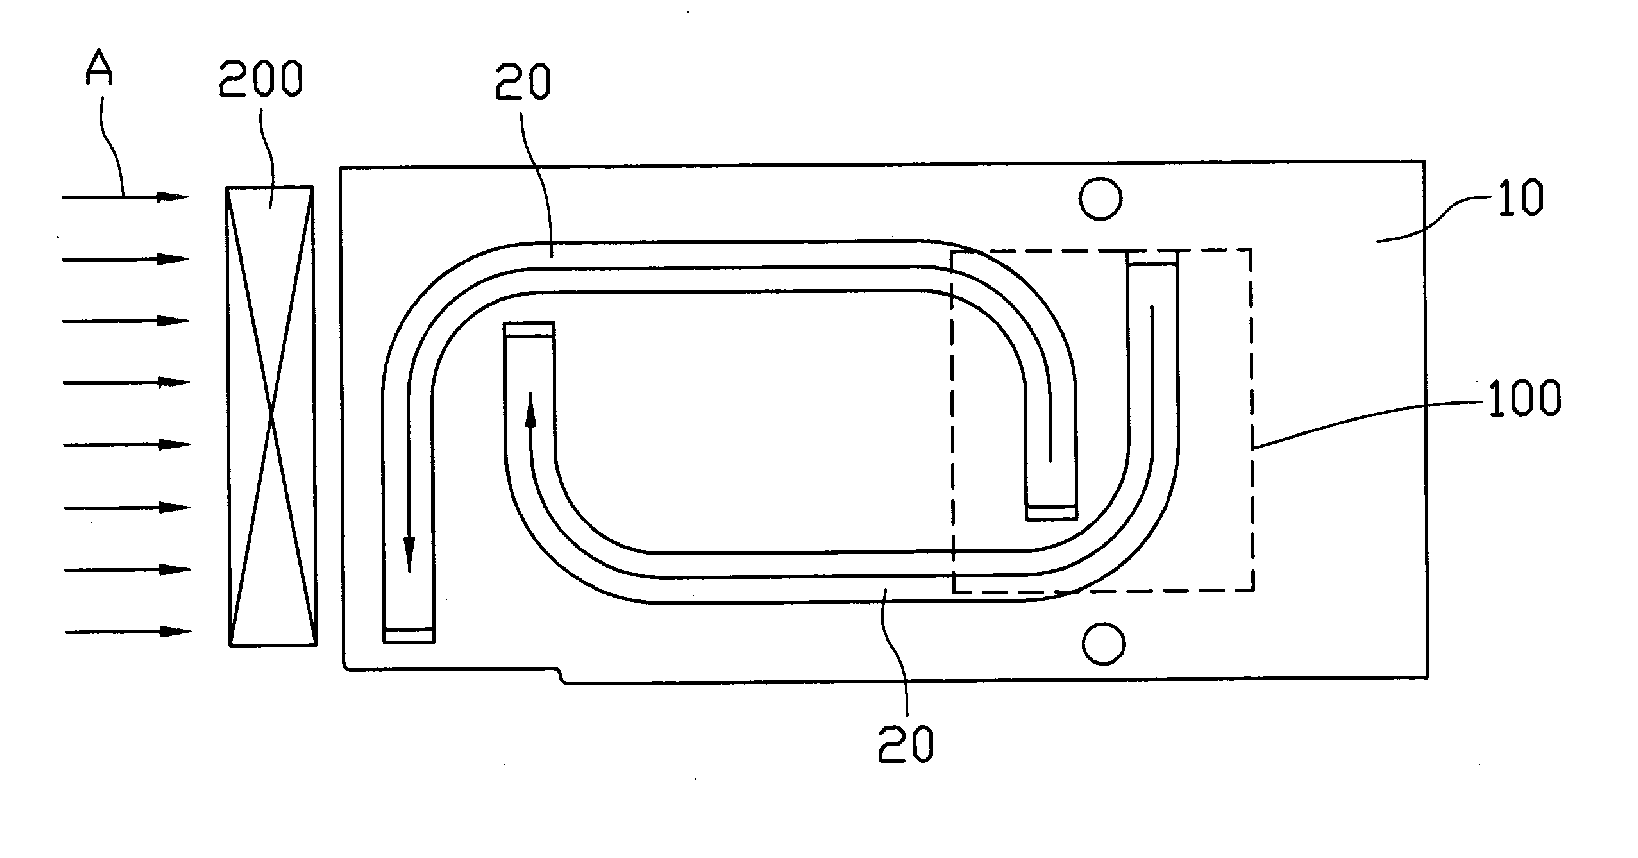 Heat sink with heat pipes